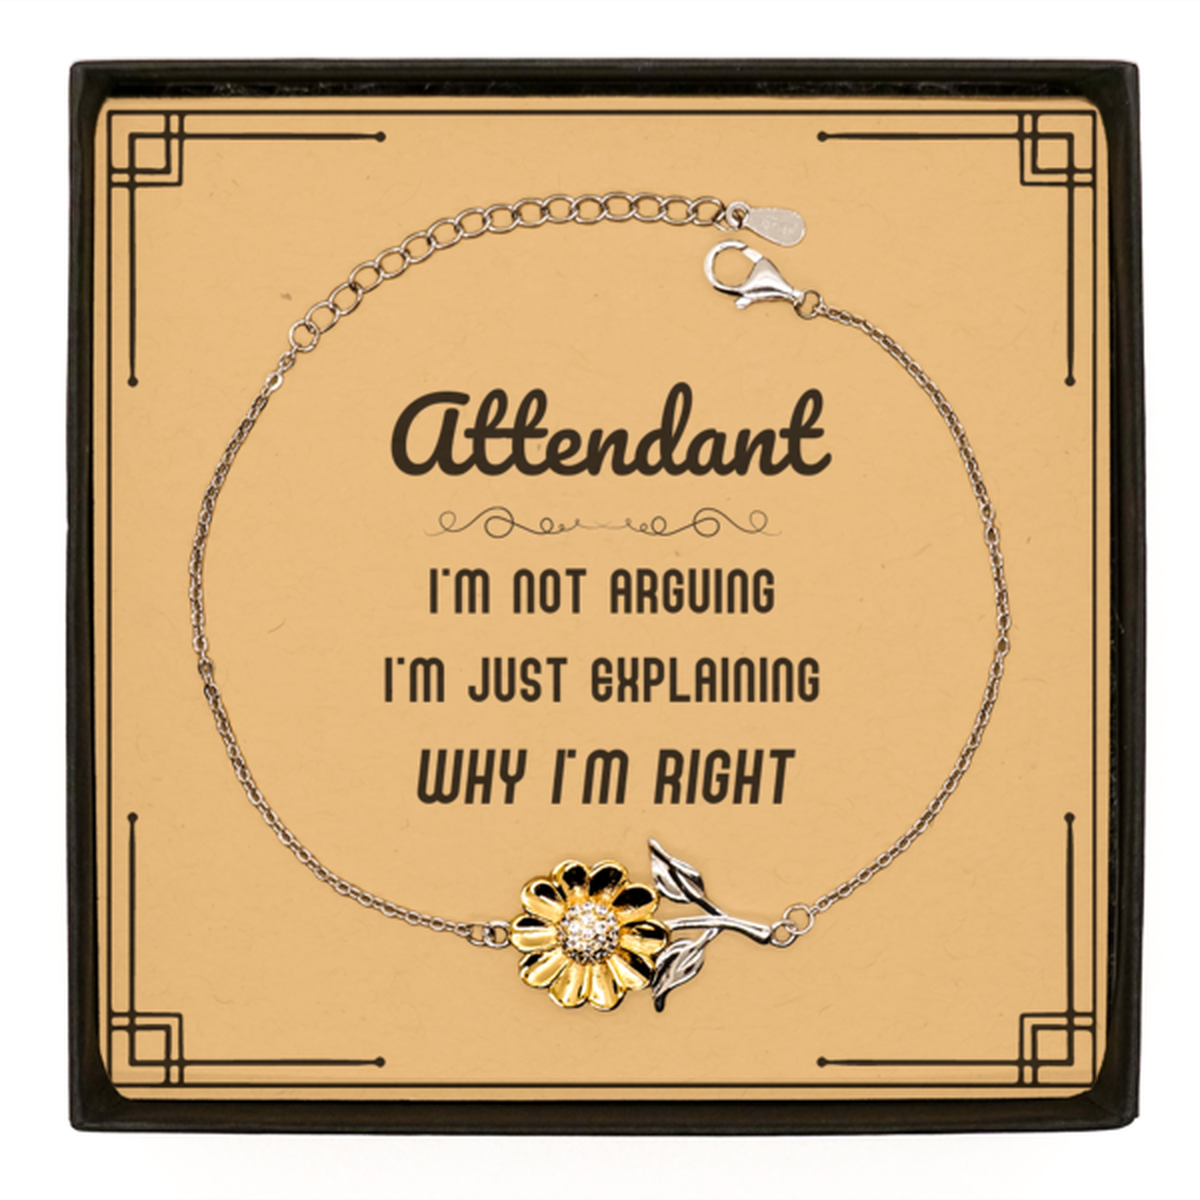 Attendant I'm not Arguing. I'm Just Explaining Why I'm RIGHT Sunflower Bracelet, Funny Saying Quote Attendant Gifts For Attendant Message Card Graduation Birthday Christmas Gifts for Men Women Coworker